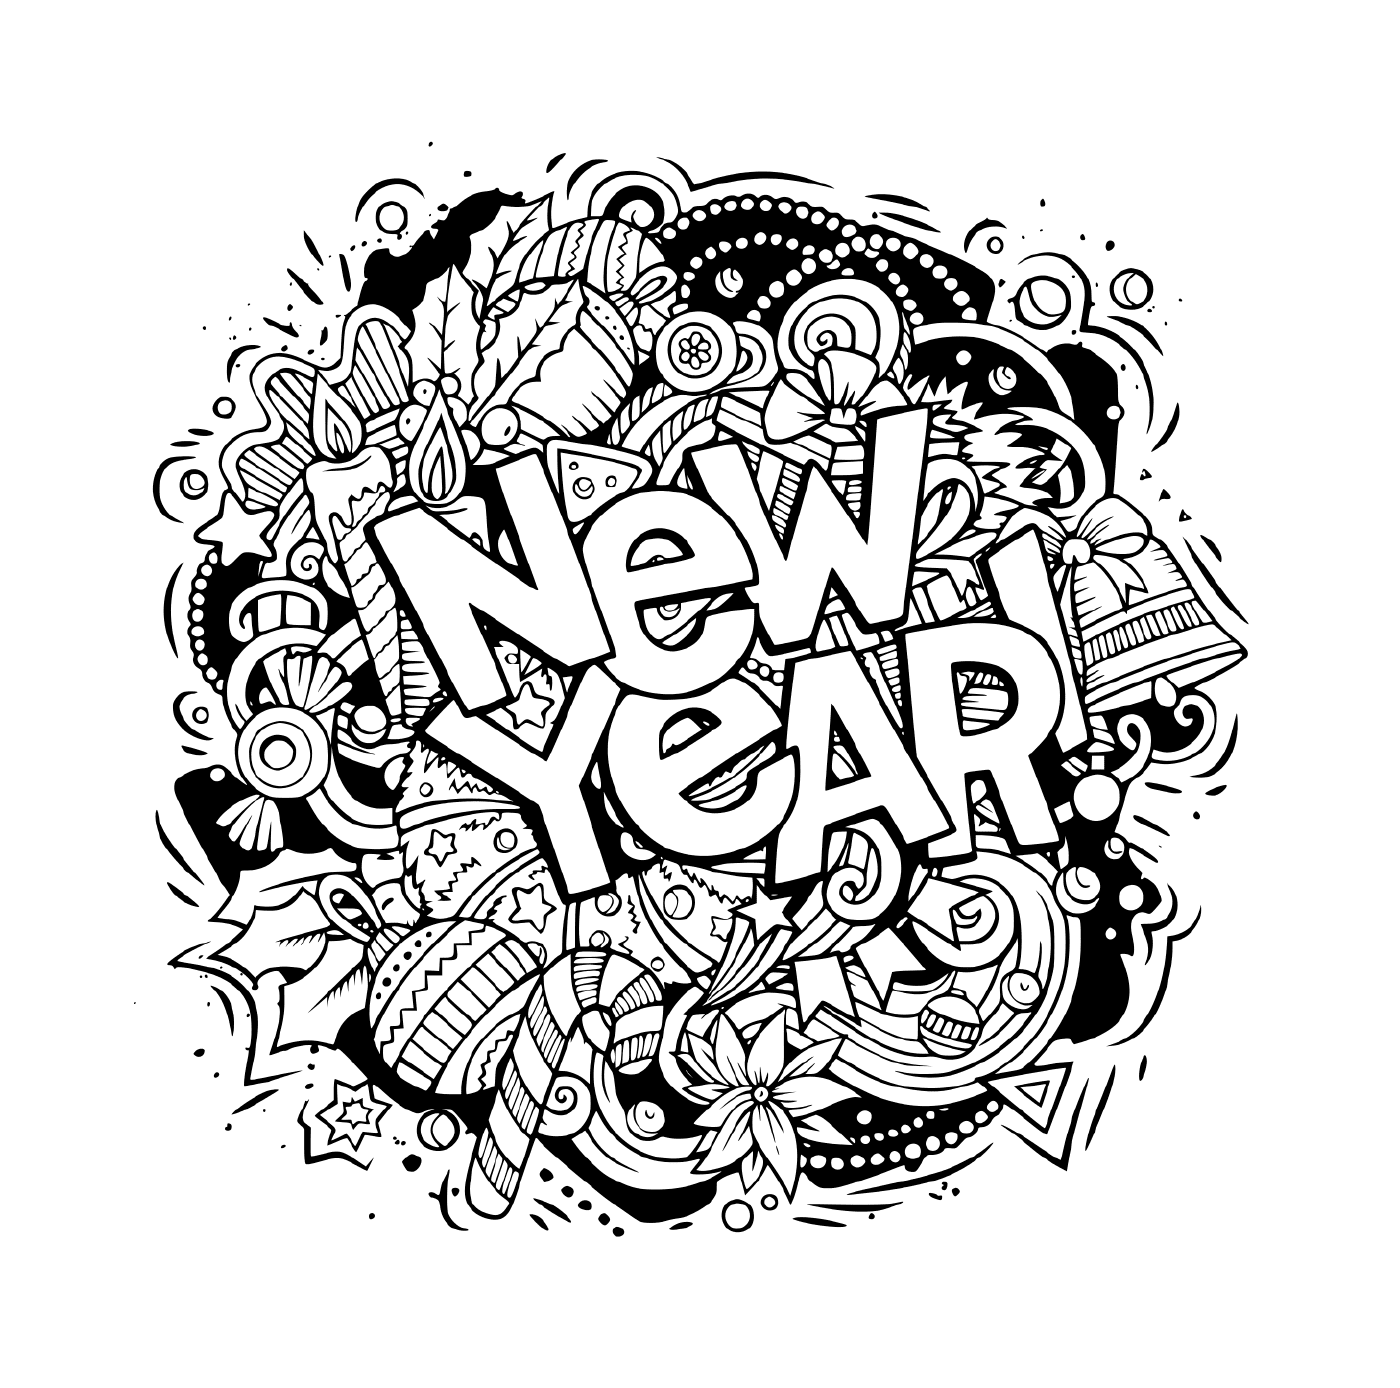  Doodles, objects and elements for the new year 